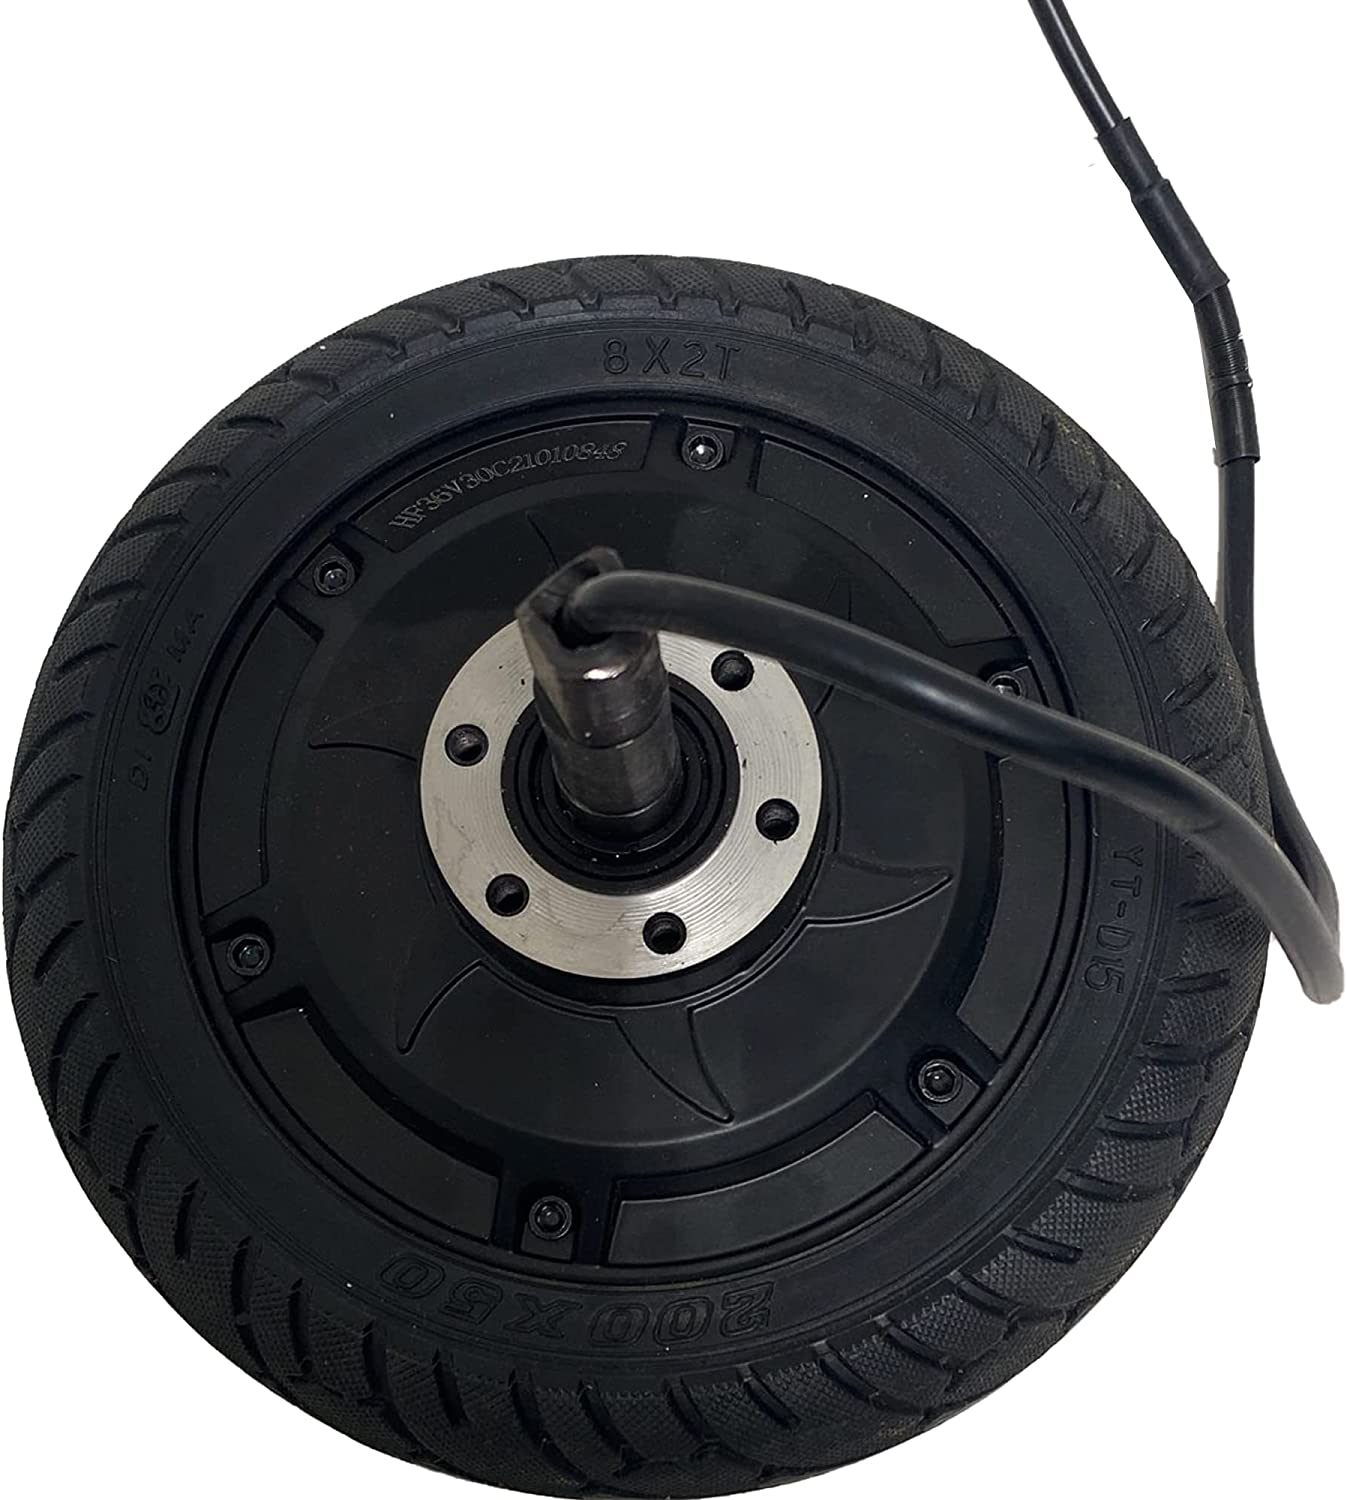 Lynx-Mobility Scooter Rear Tire (Motor)